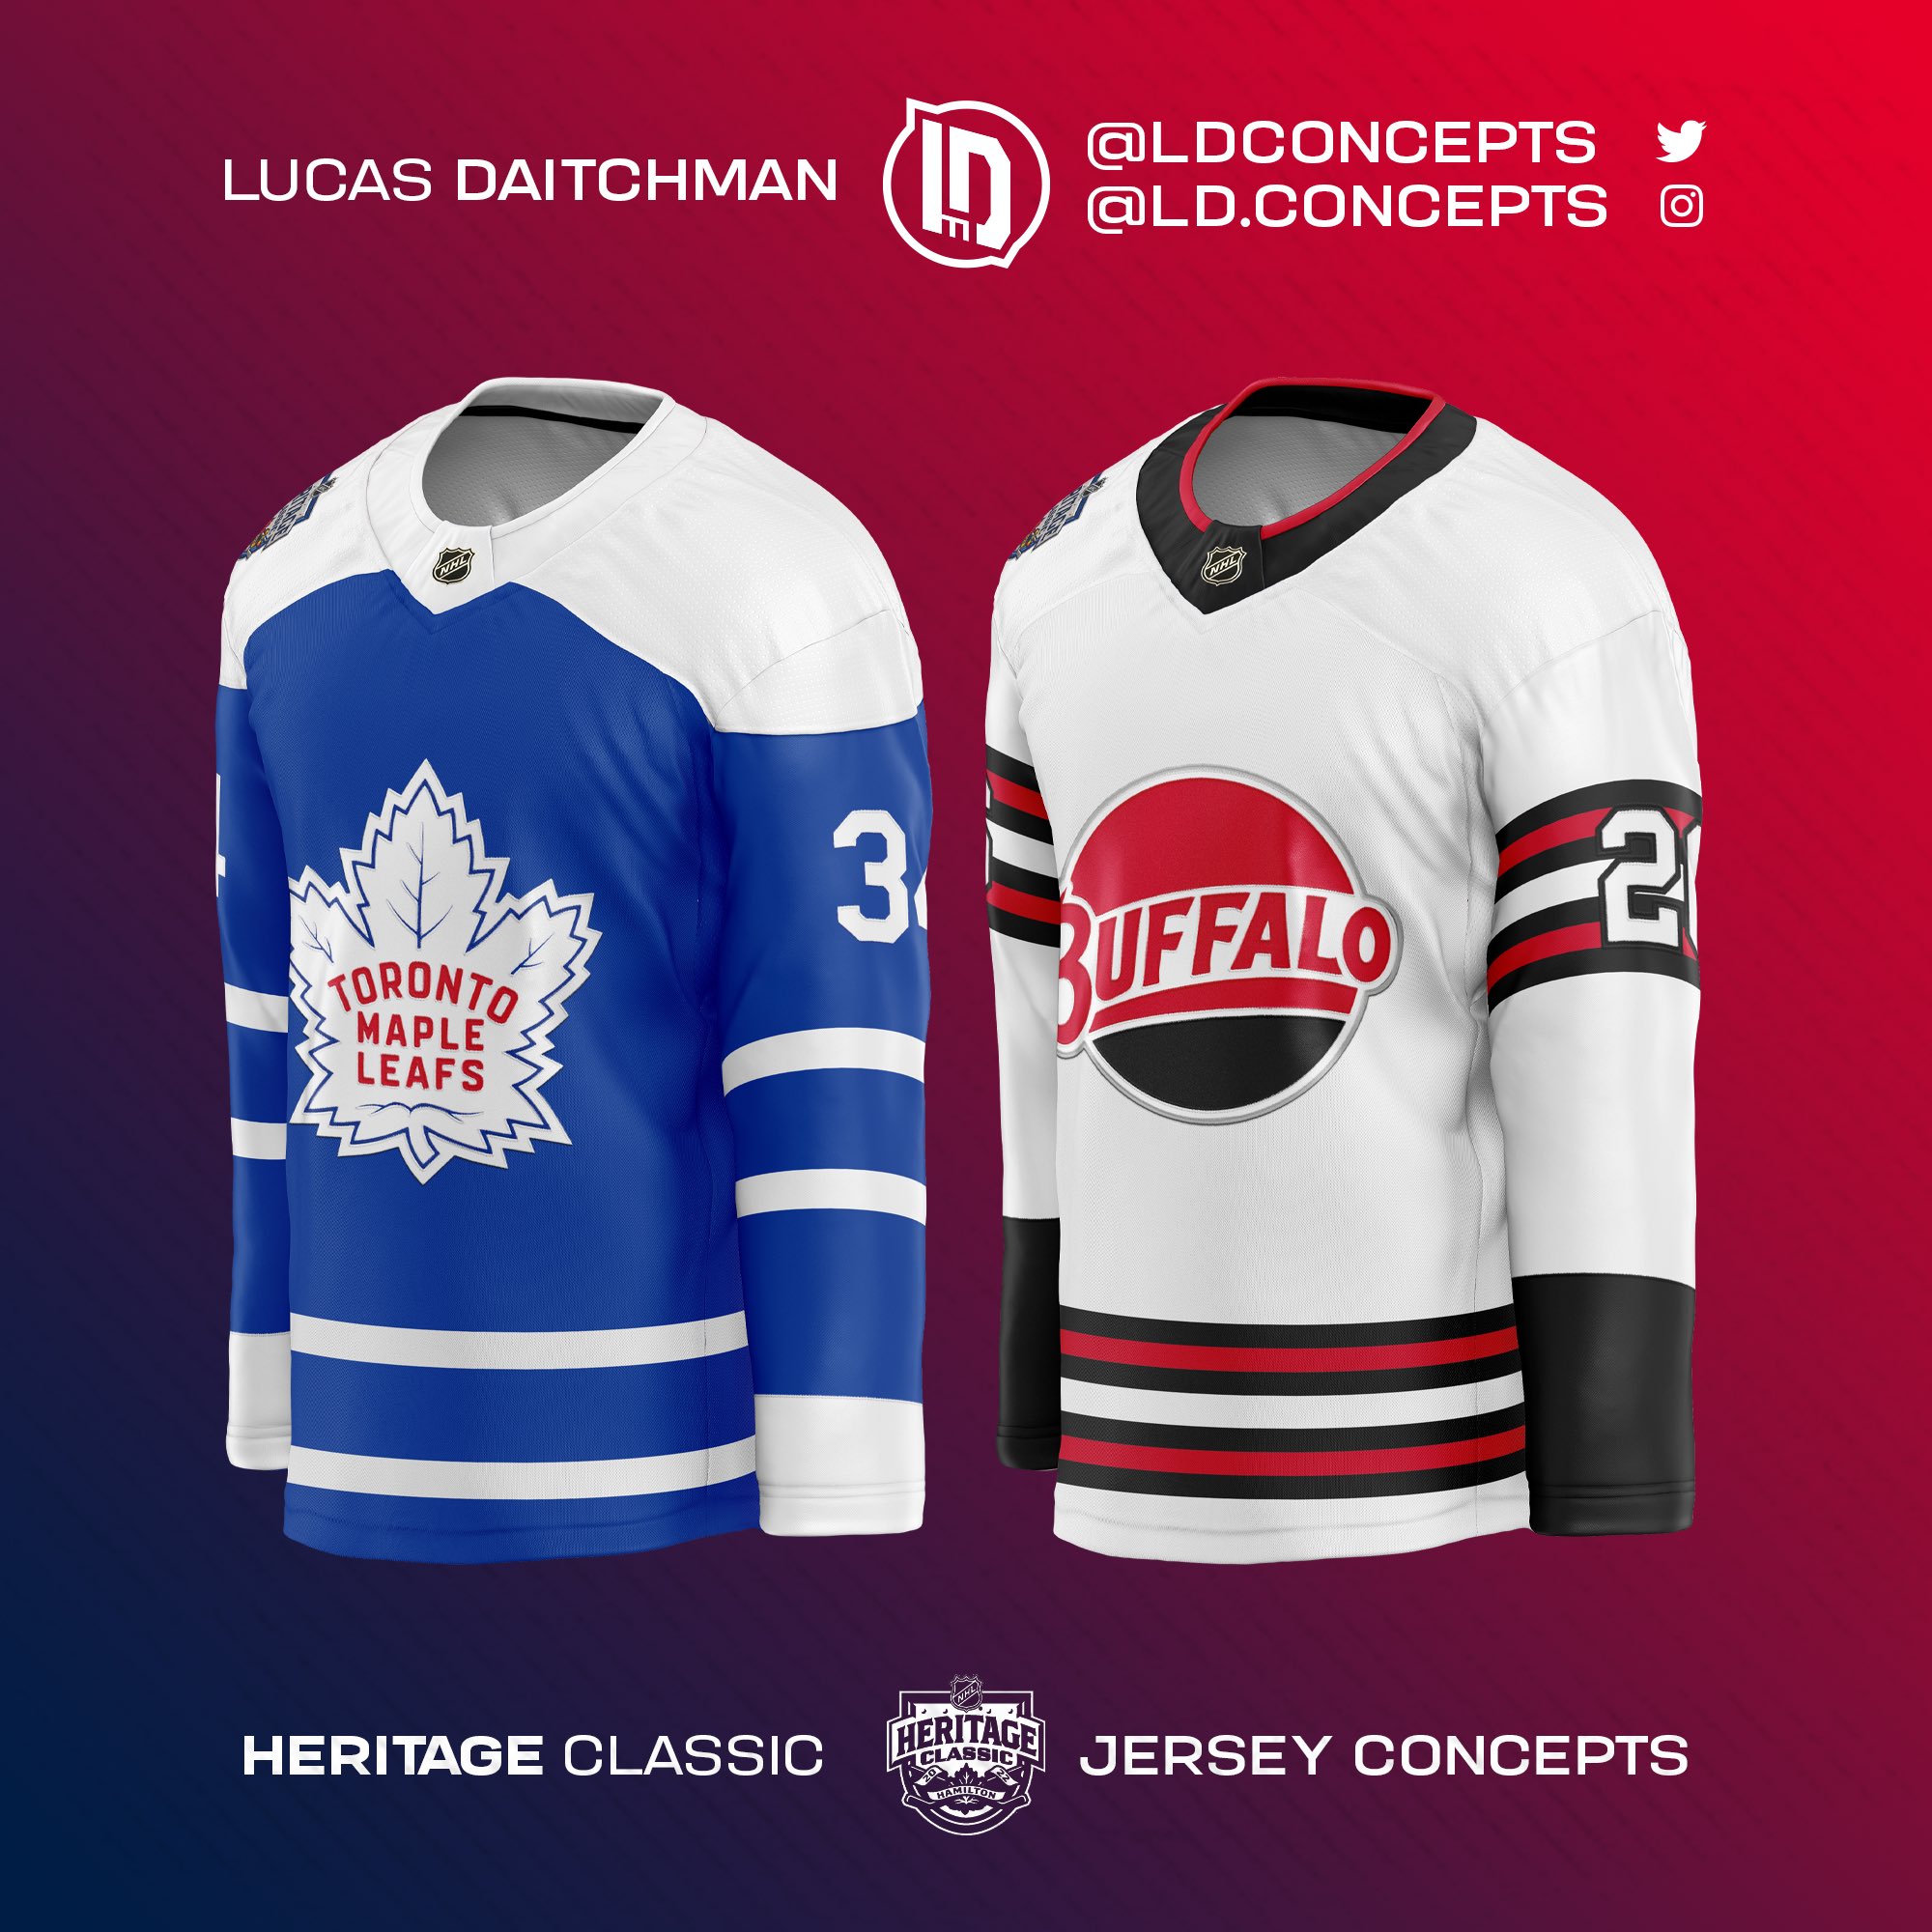 How about something like this concept for a Leafs Heritage Classic